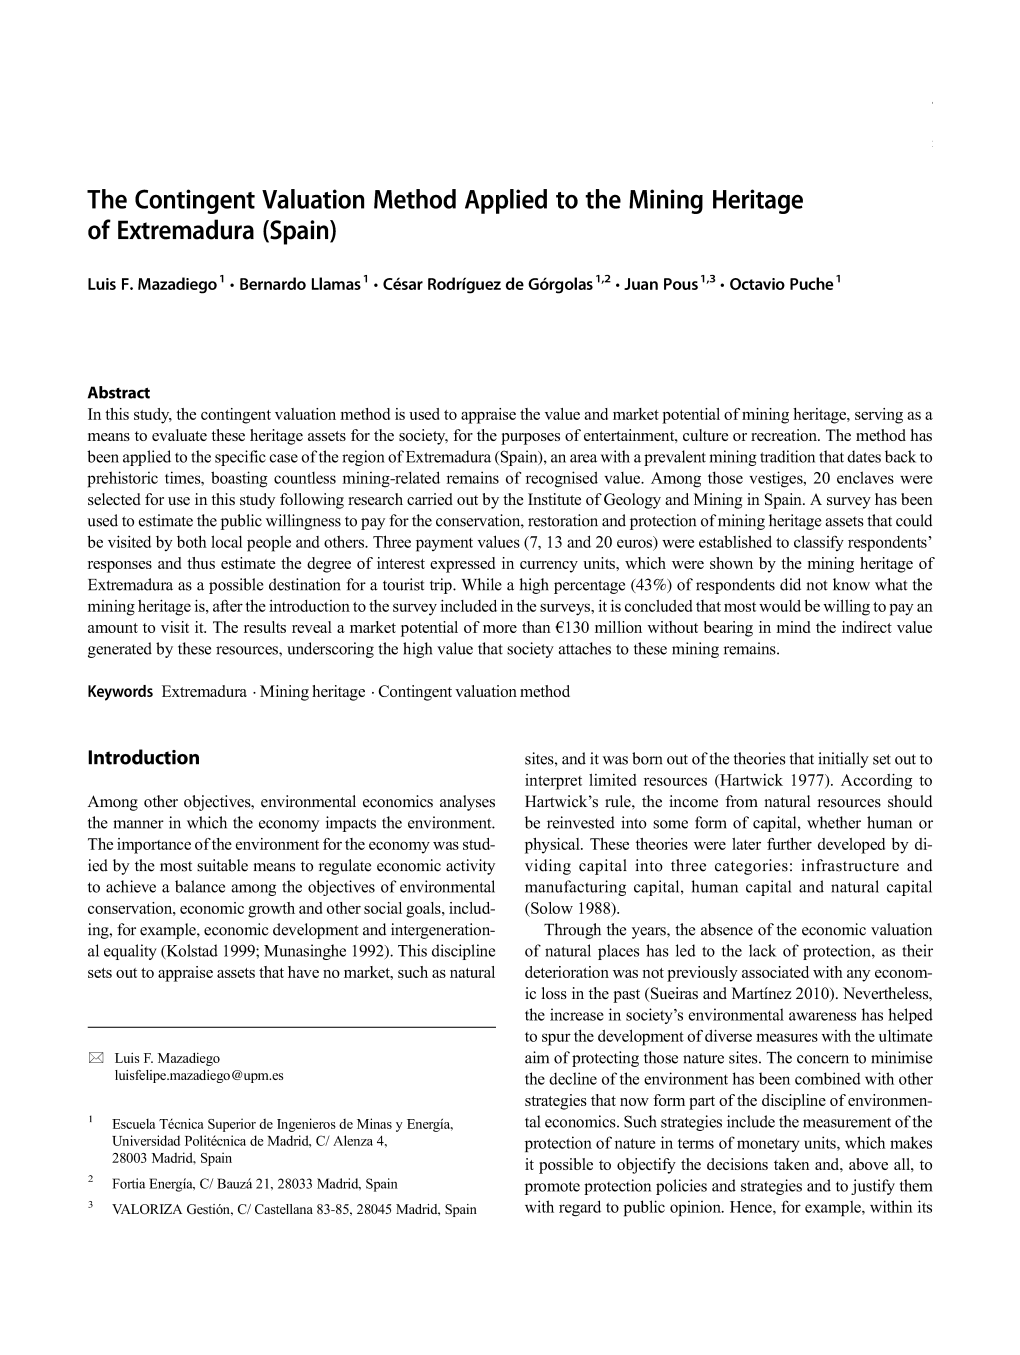 The Contingent Valuation Method Applied to the Mining Heritage of Extremadura (Spain)